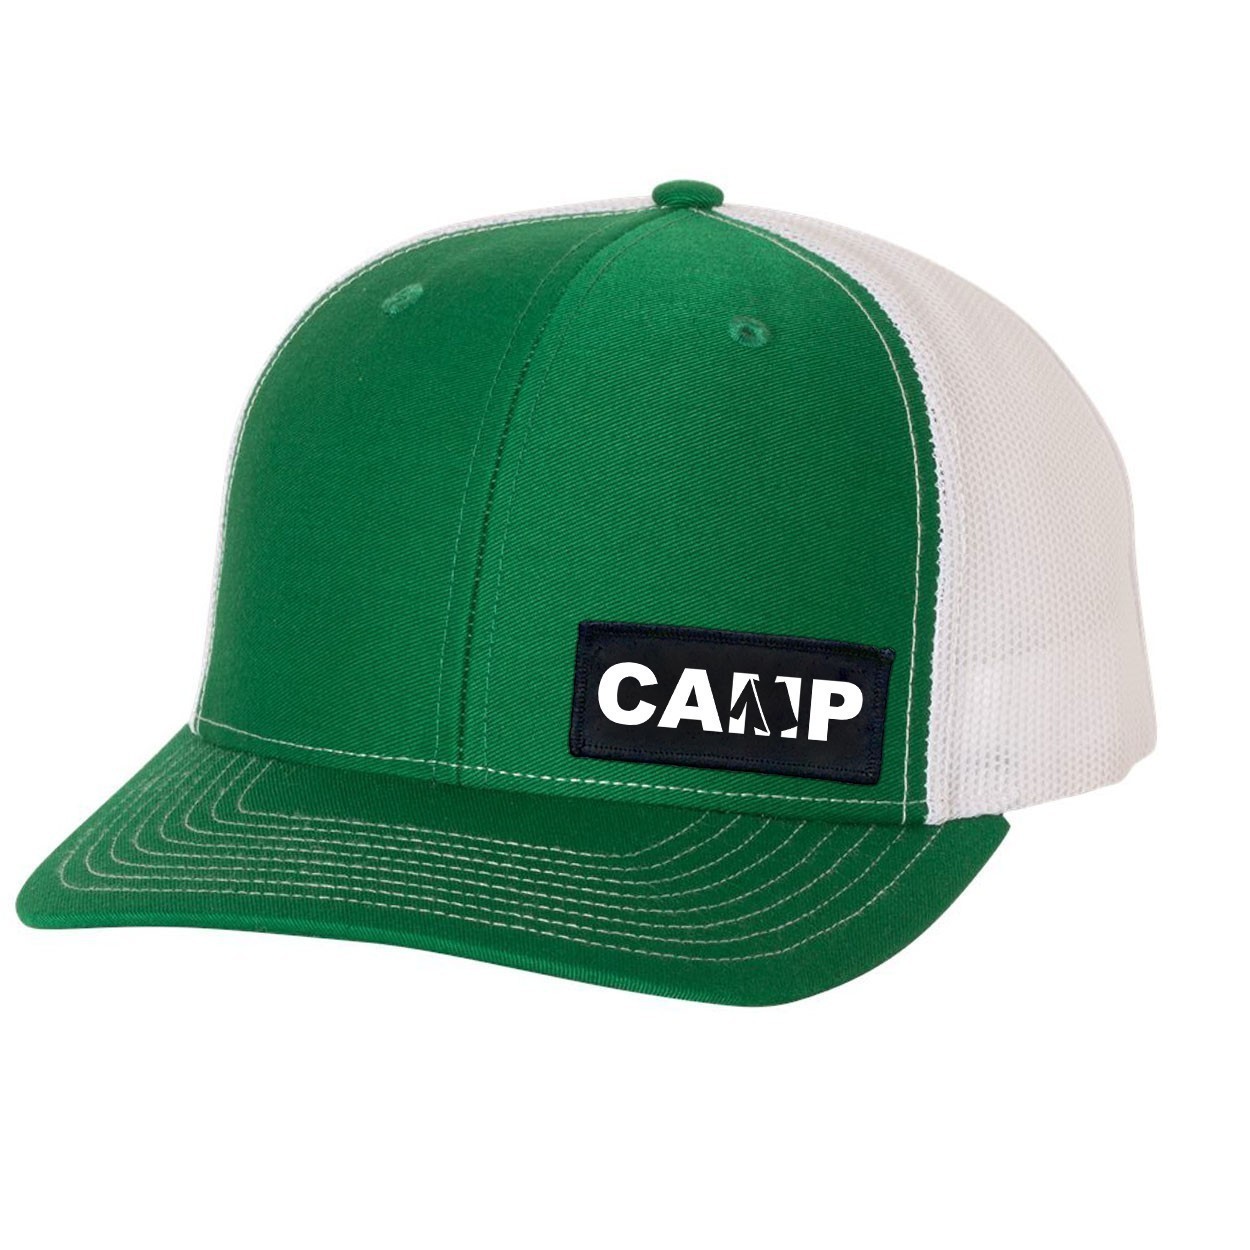 Camp Tent Logo Night Out Woven Patch Snapback Trucker Hat Green/White (White Logo)